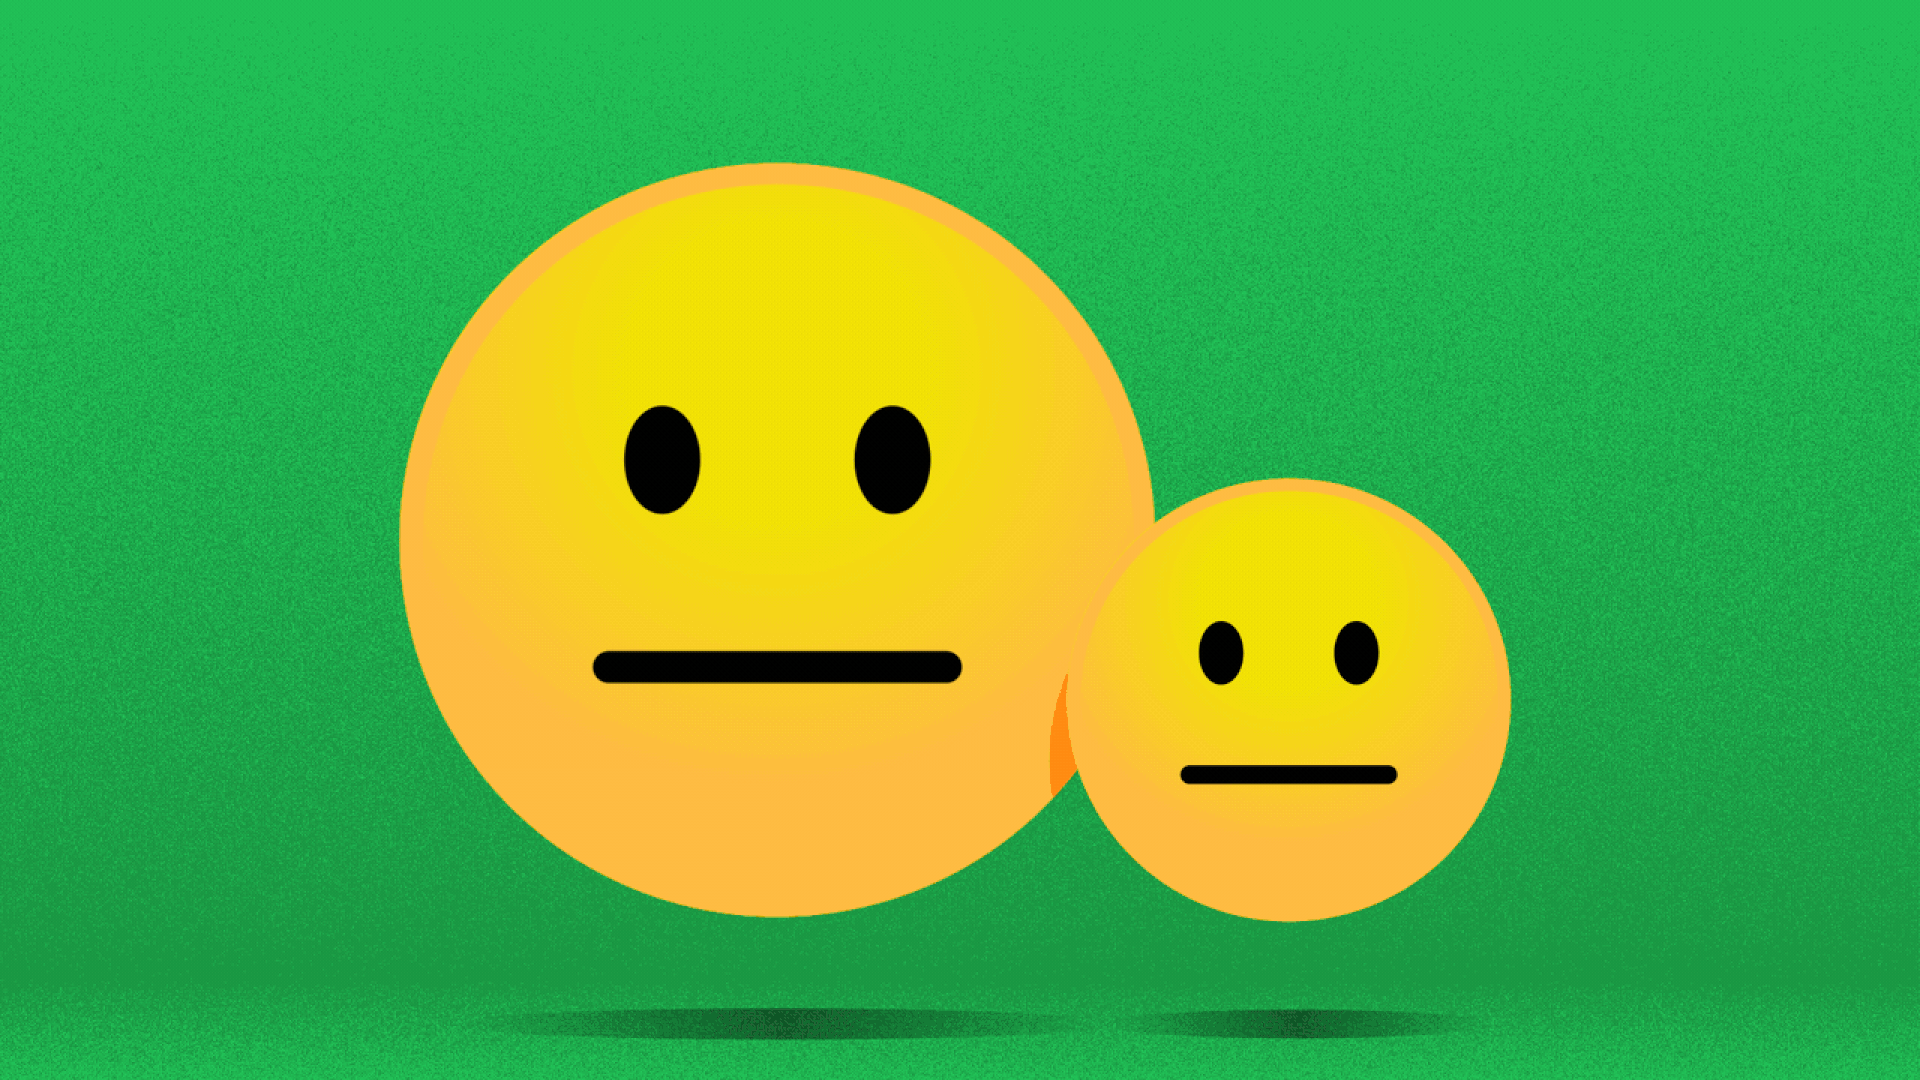 Animated illustration of two neutral emojis, one big and one smaller, smiling, and sunglasses appearing over their faces. 